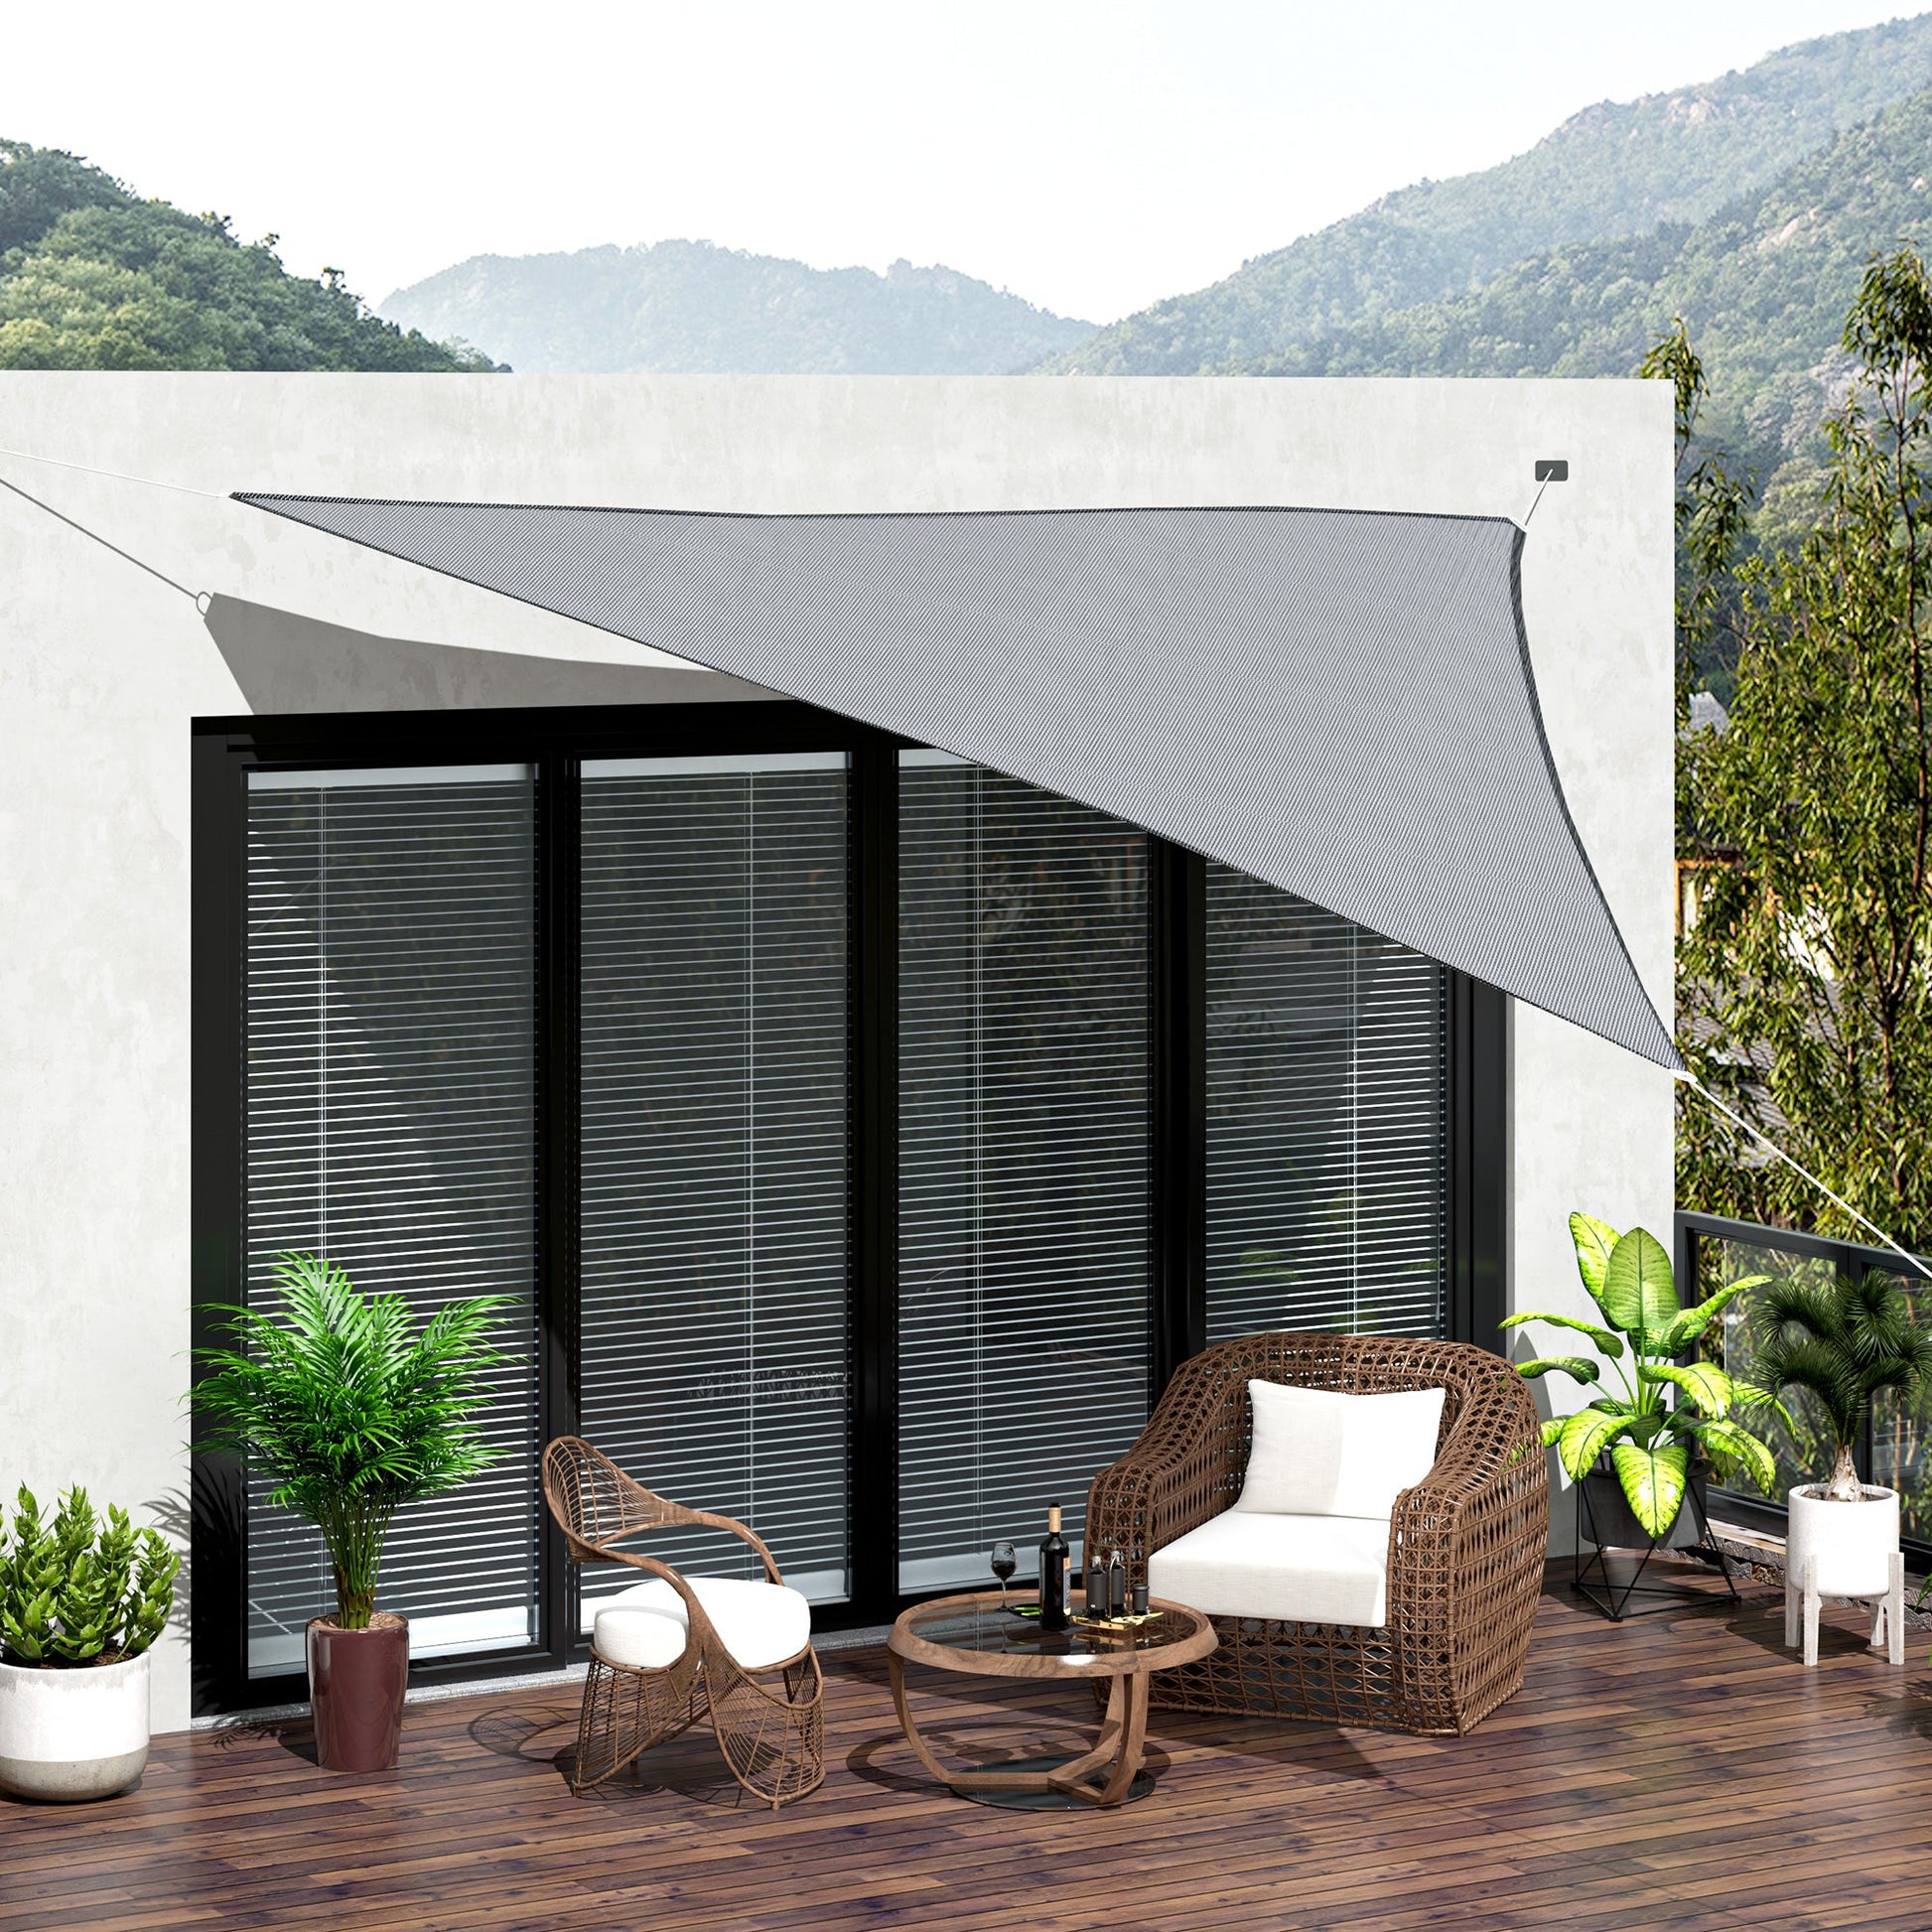 Triangle 12' Canopy Sun Sail Shade Garden Cover UV Protector Outdoor Patio Lawn Shelter with Carrying Bag, Grey at Gallery Canada